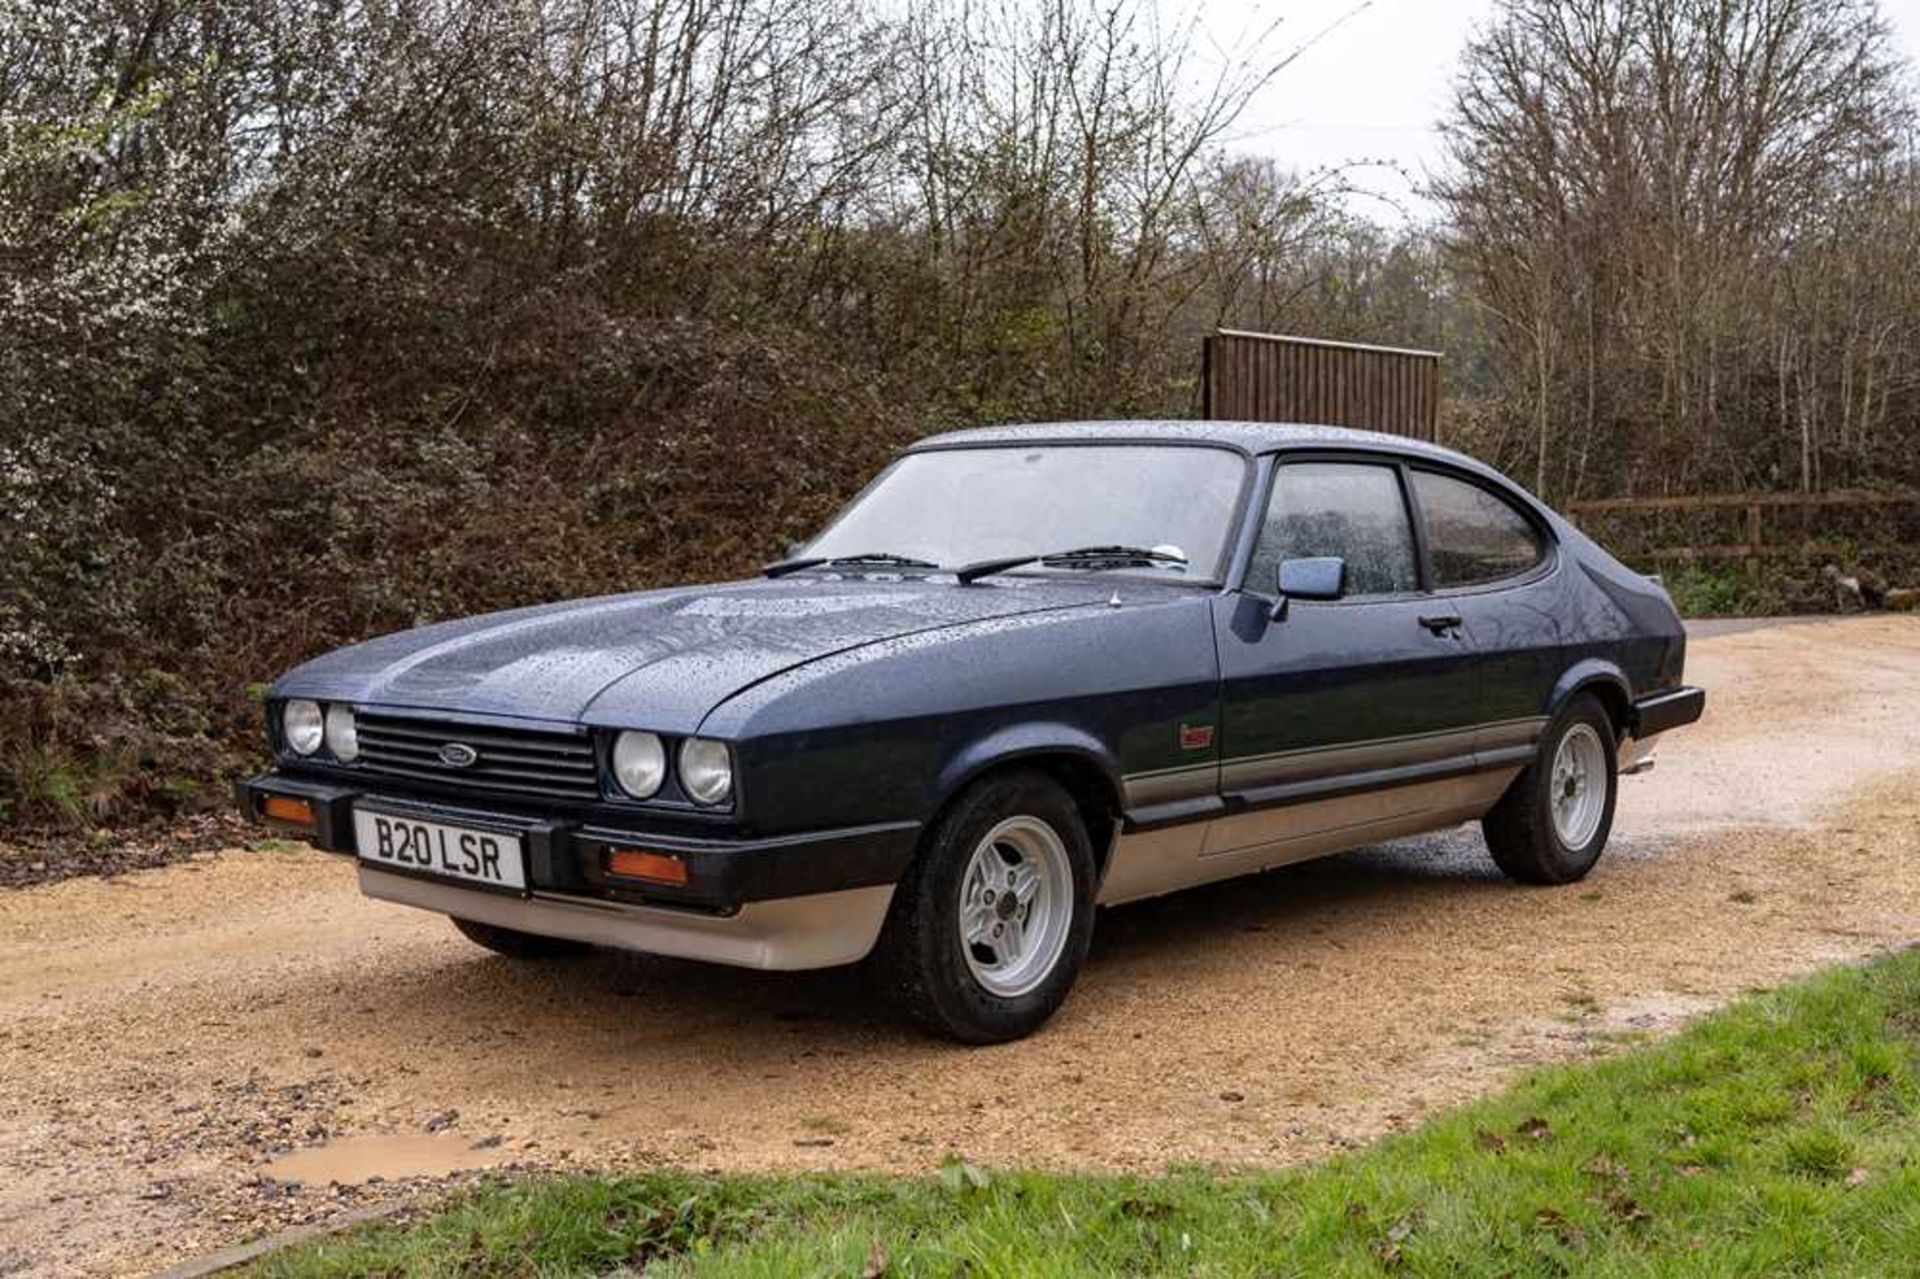 1985 Ford Capri Laser 2.0 Litre Warranted 55,300 miles from new